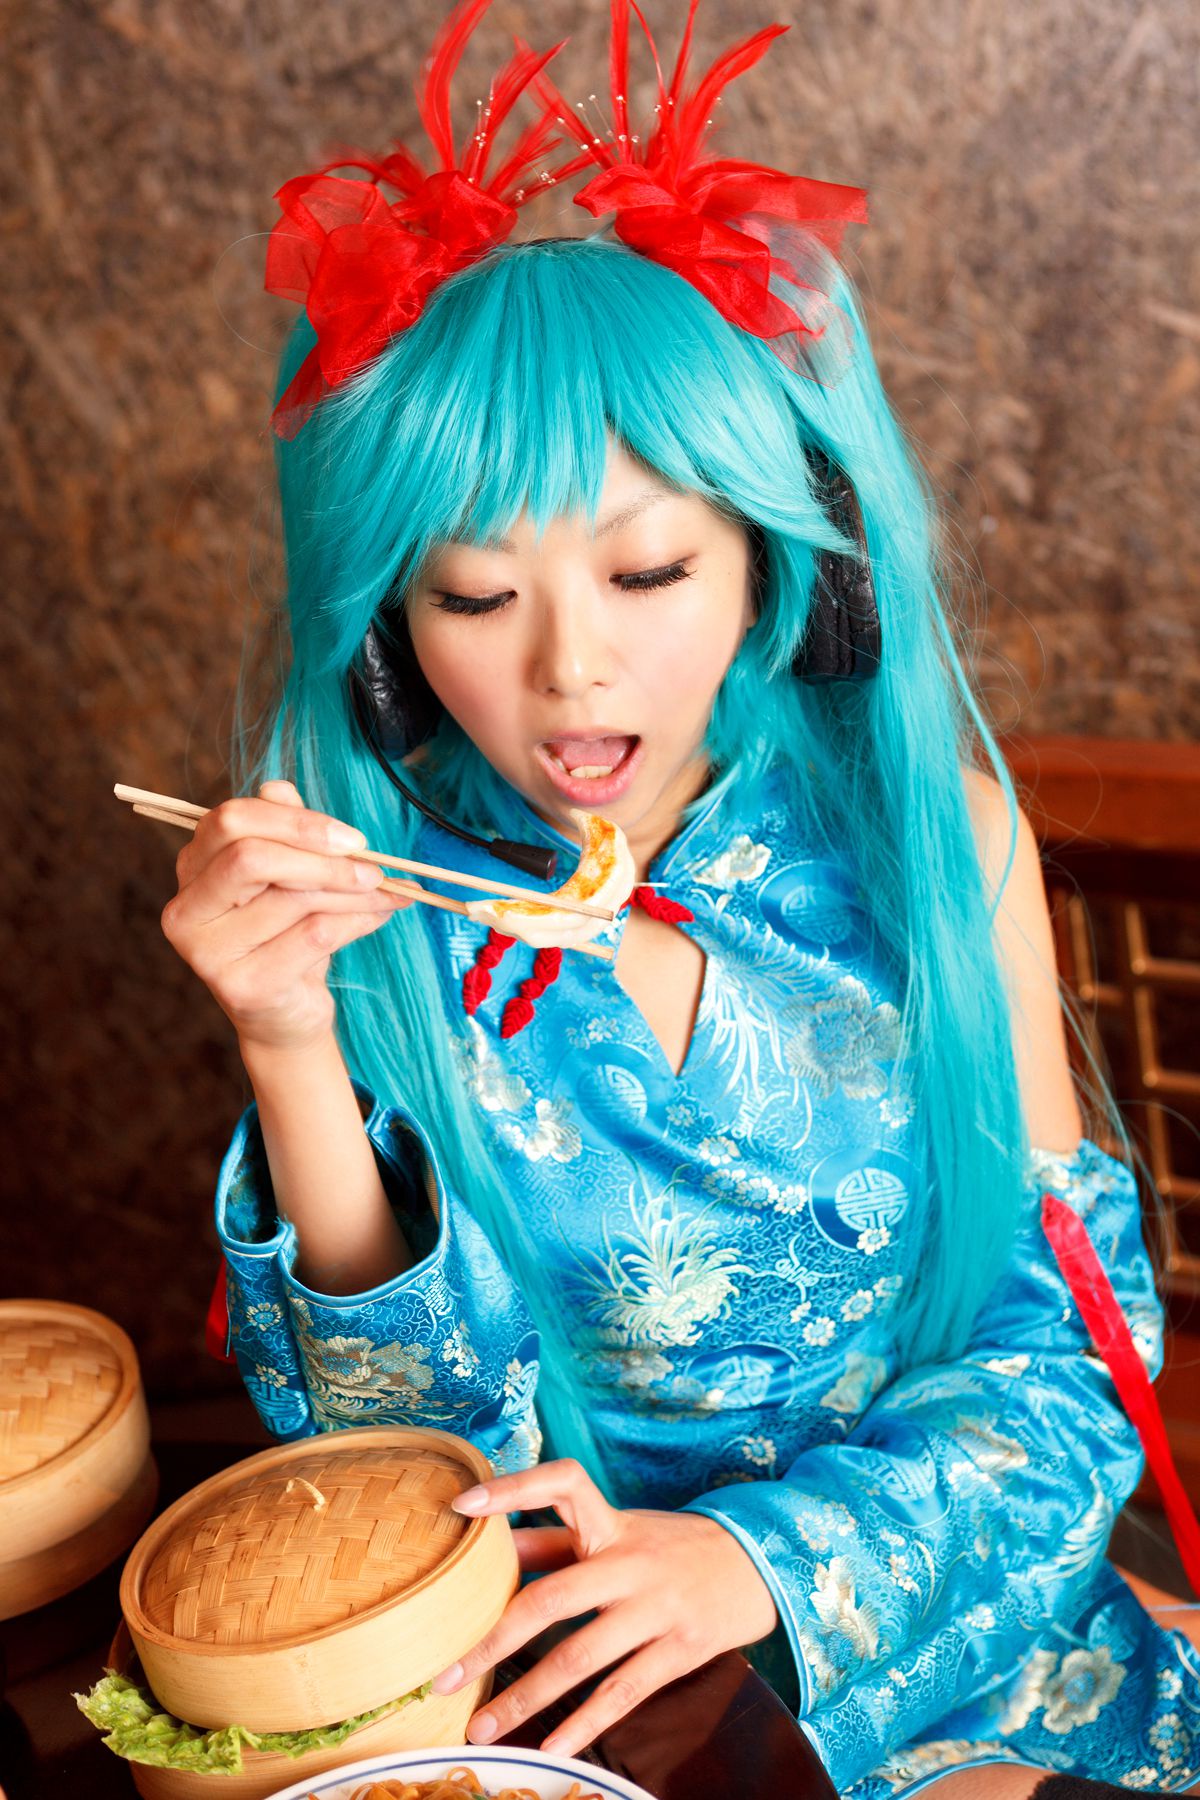 taotuhome[Cosplay] Necoco as Hatsune Miku from Vocaloid 套图第36张